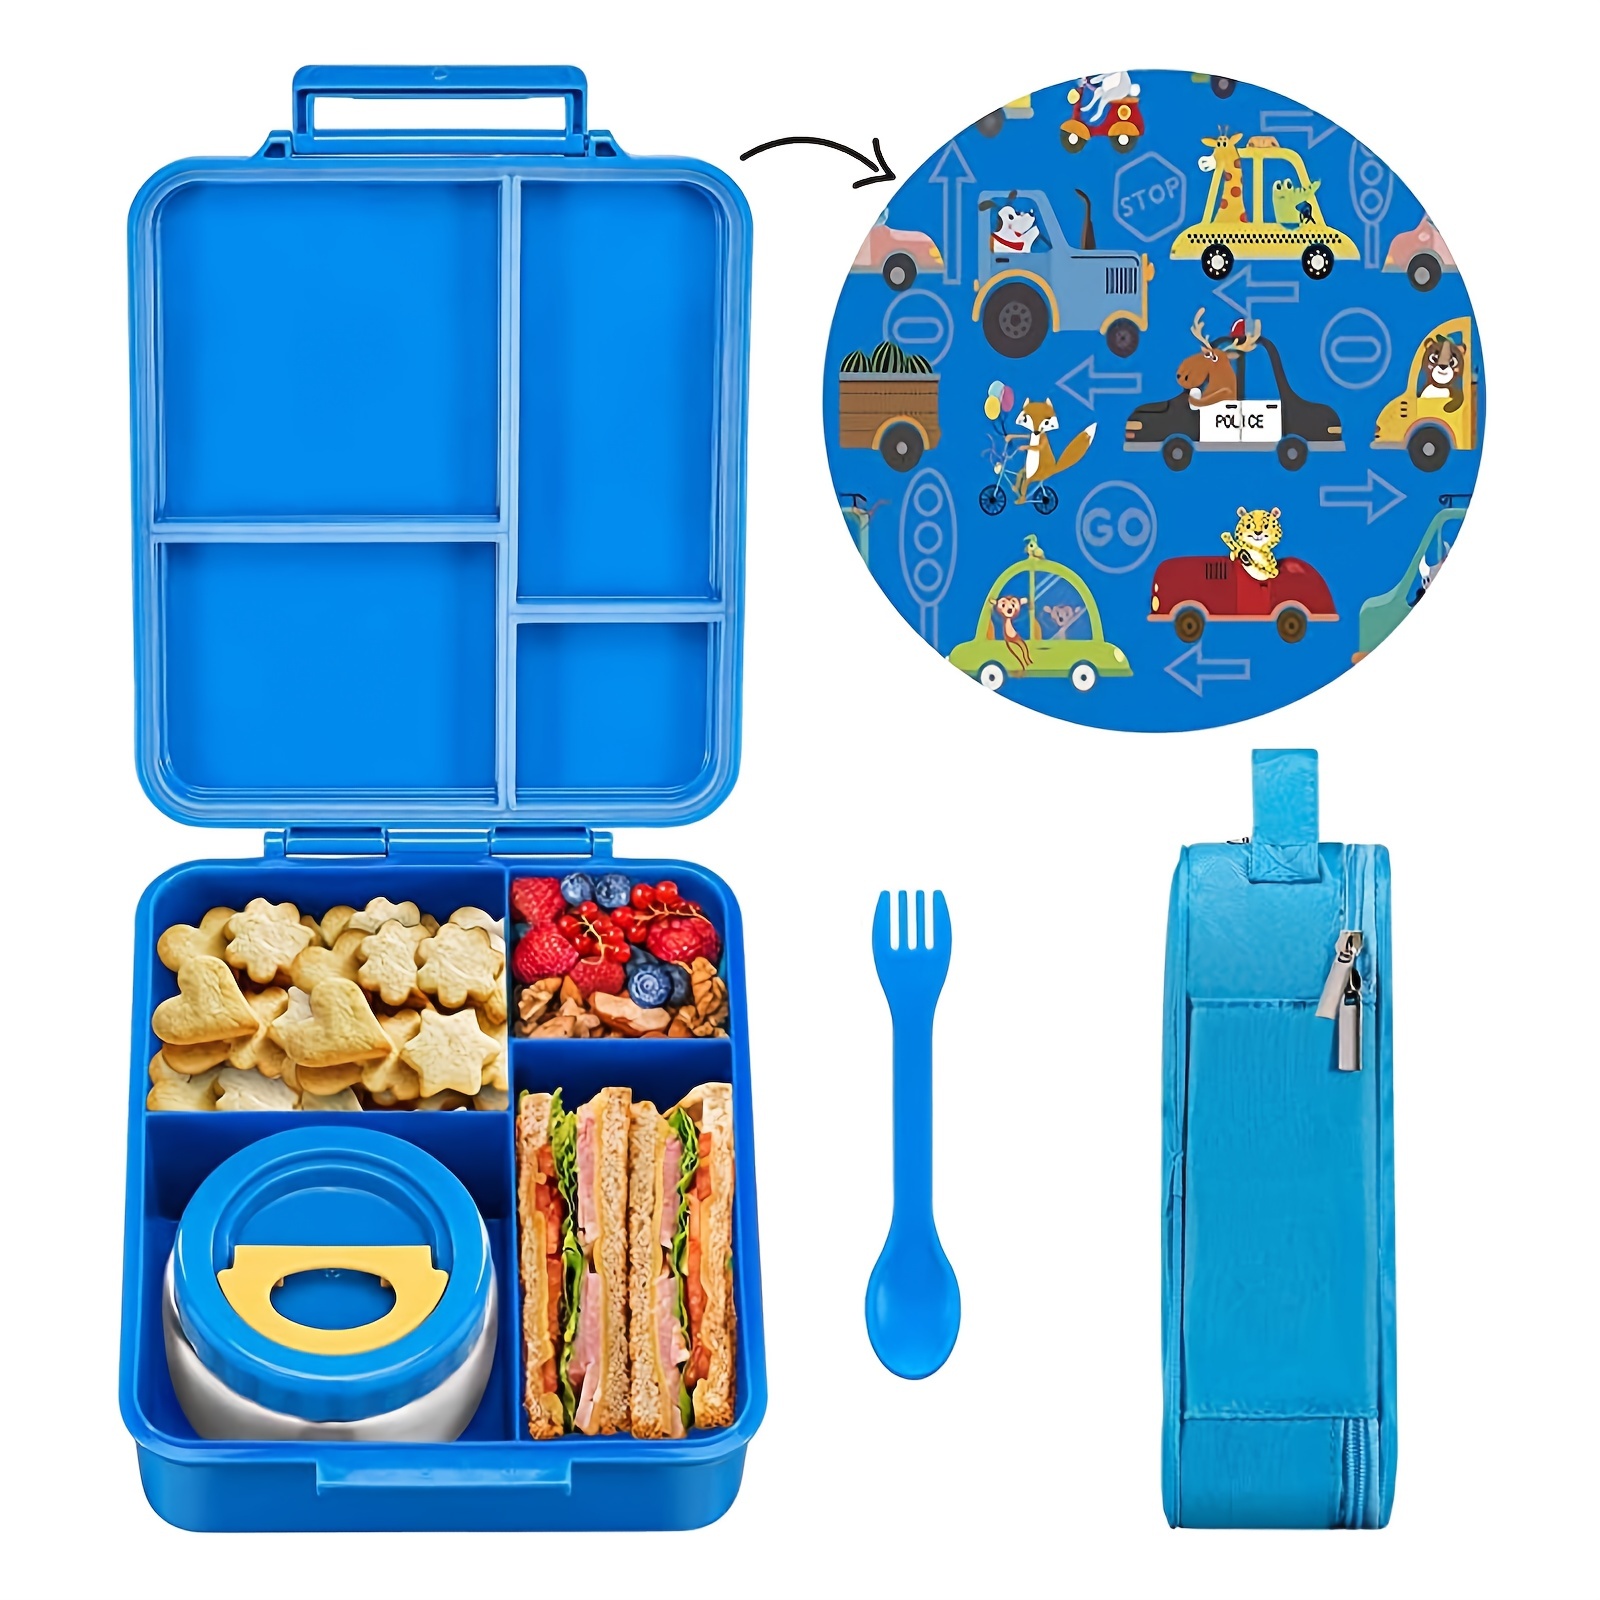 Four Grid Plastic Lunch Box For Kids Women Men Japanese Style Meal